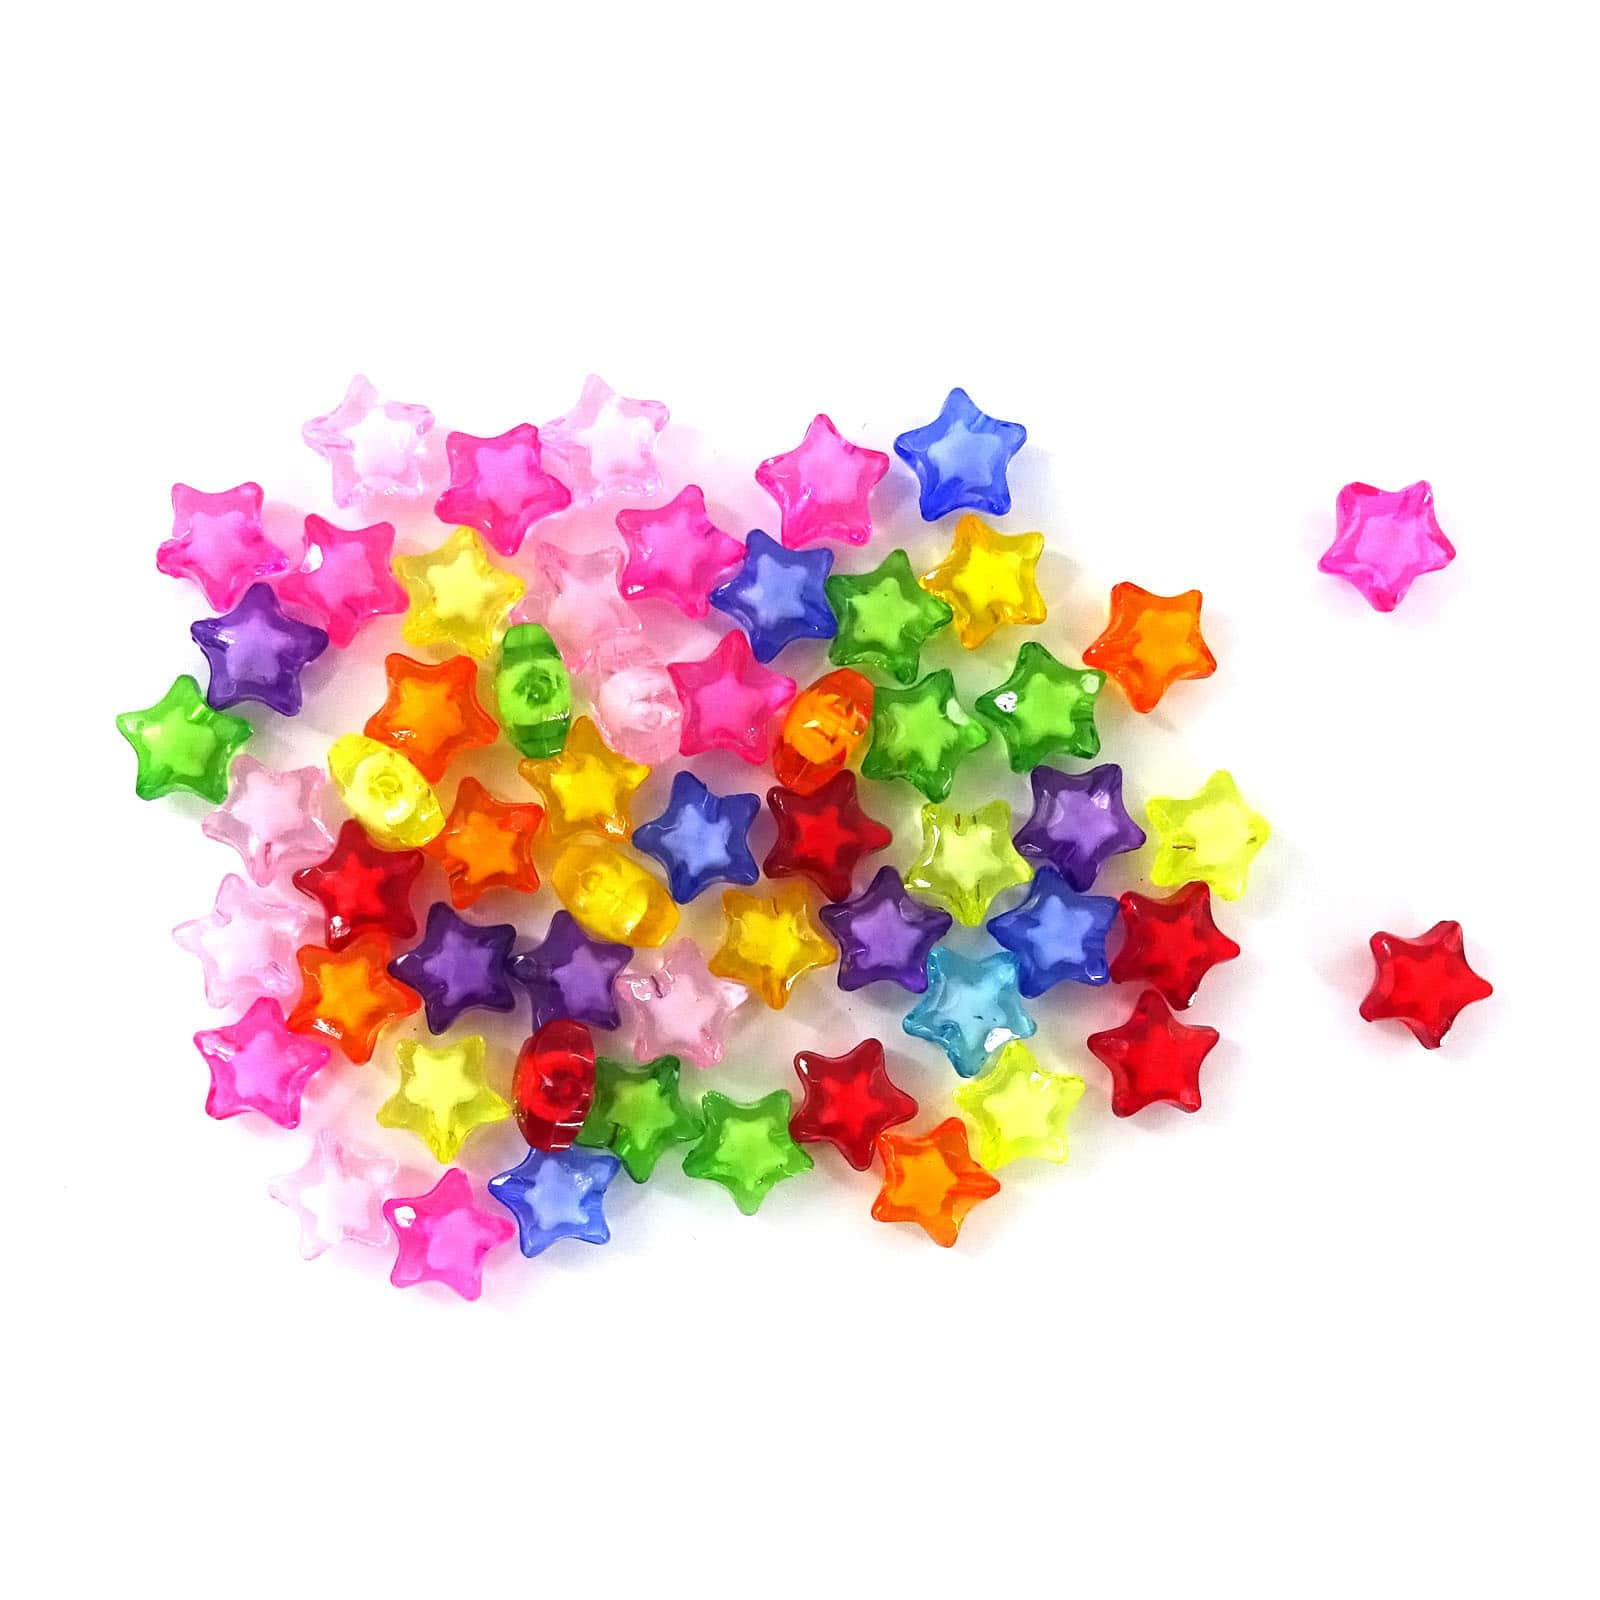 12 Packs: 60 ct. (720 total) Star Beads by Creatology™ 